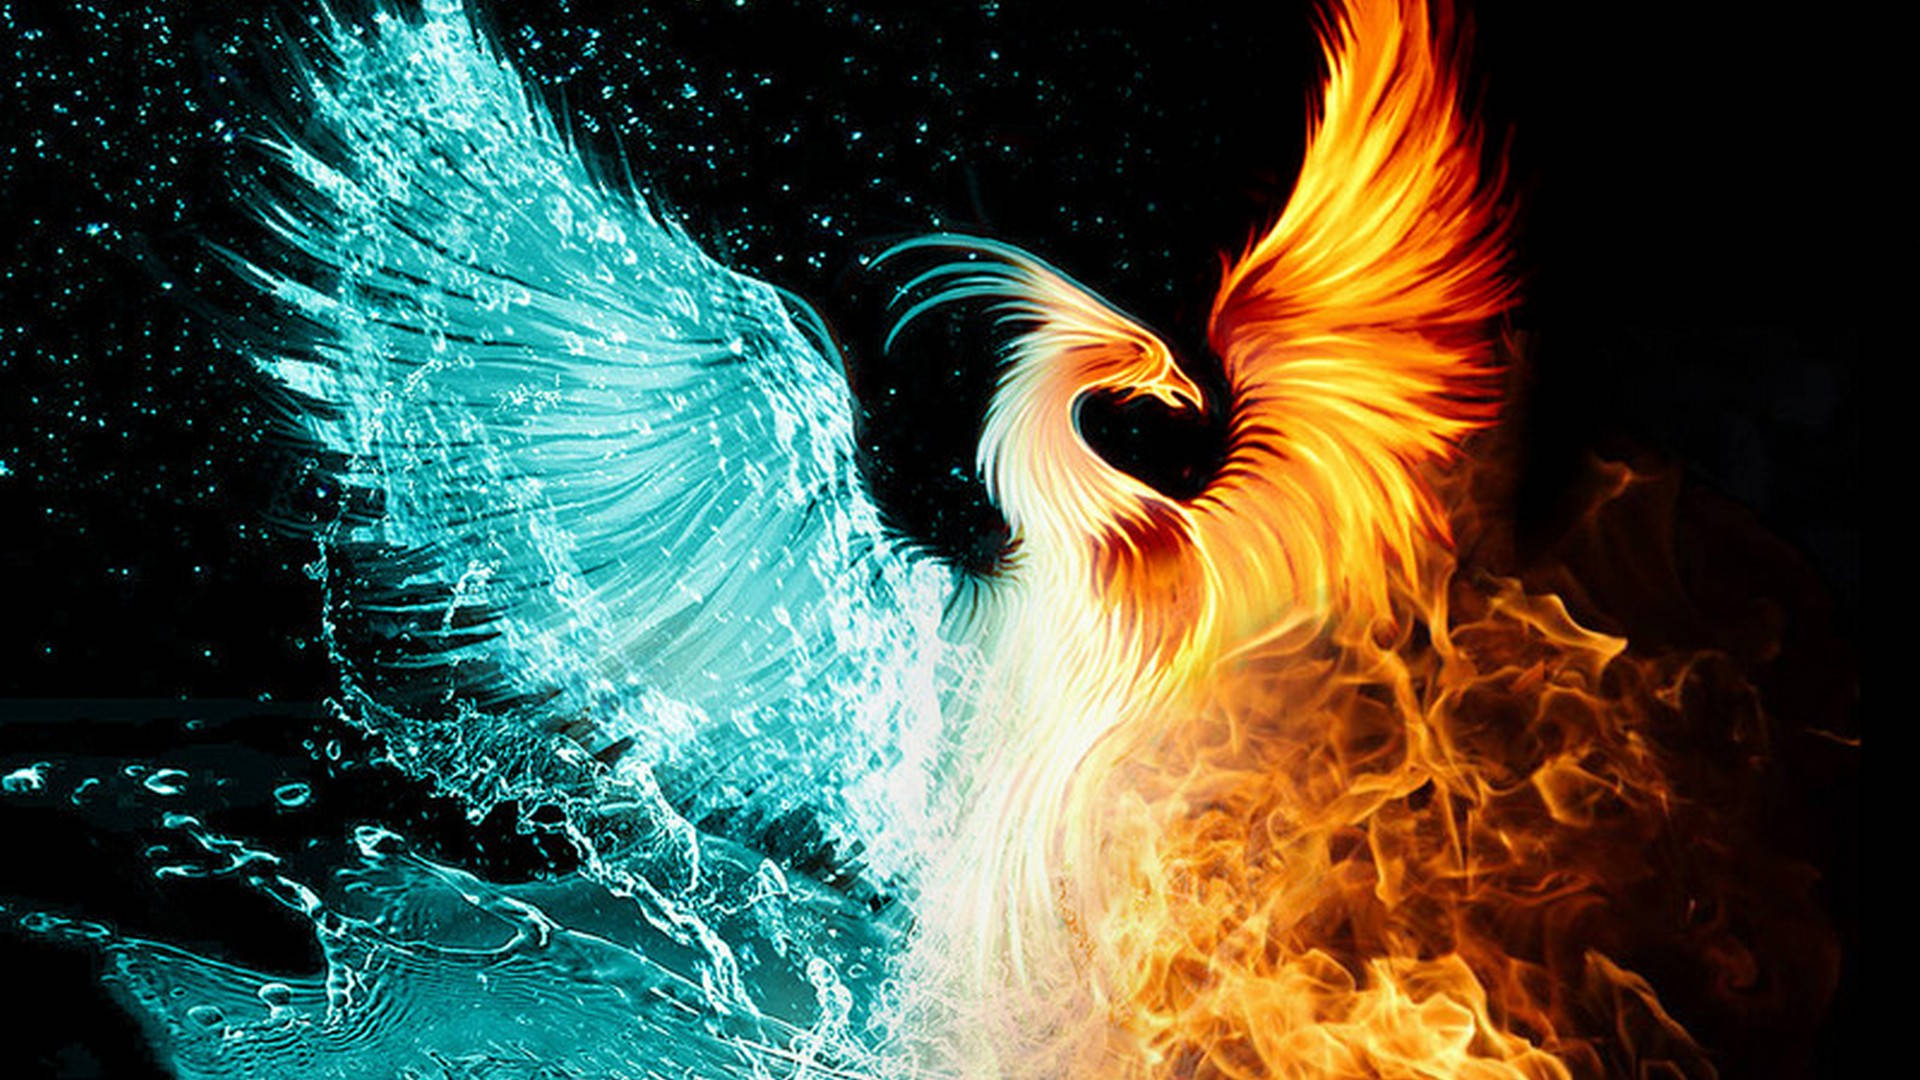 Water And Fire Wings Clash